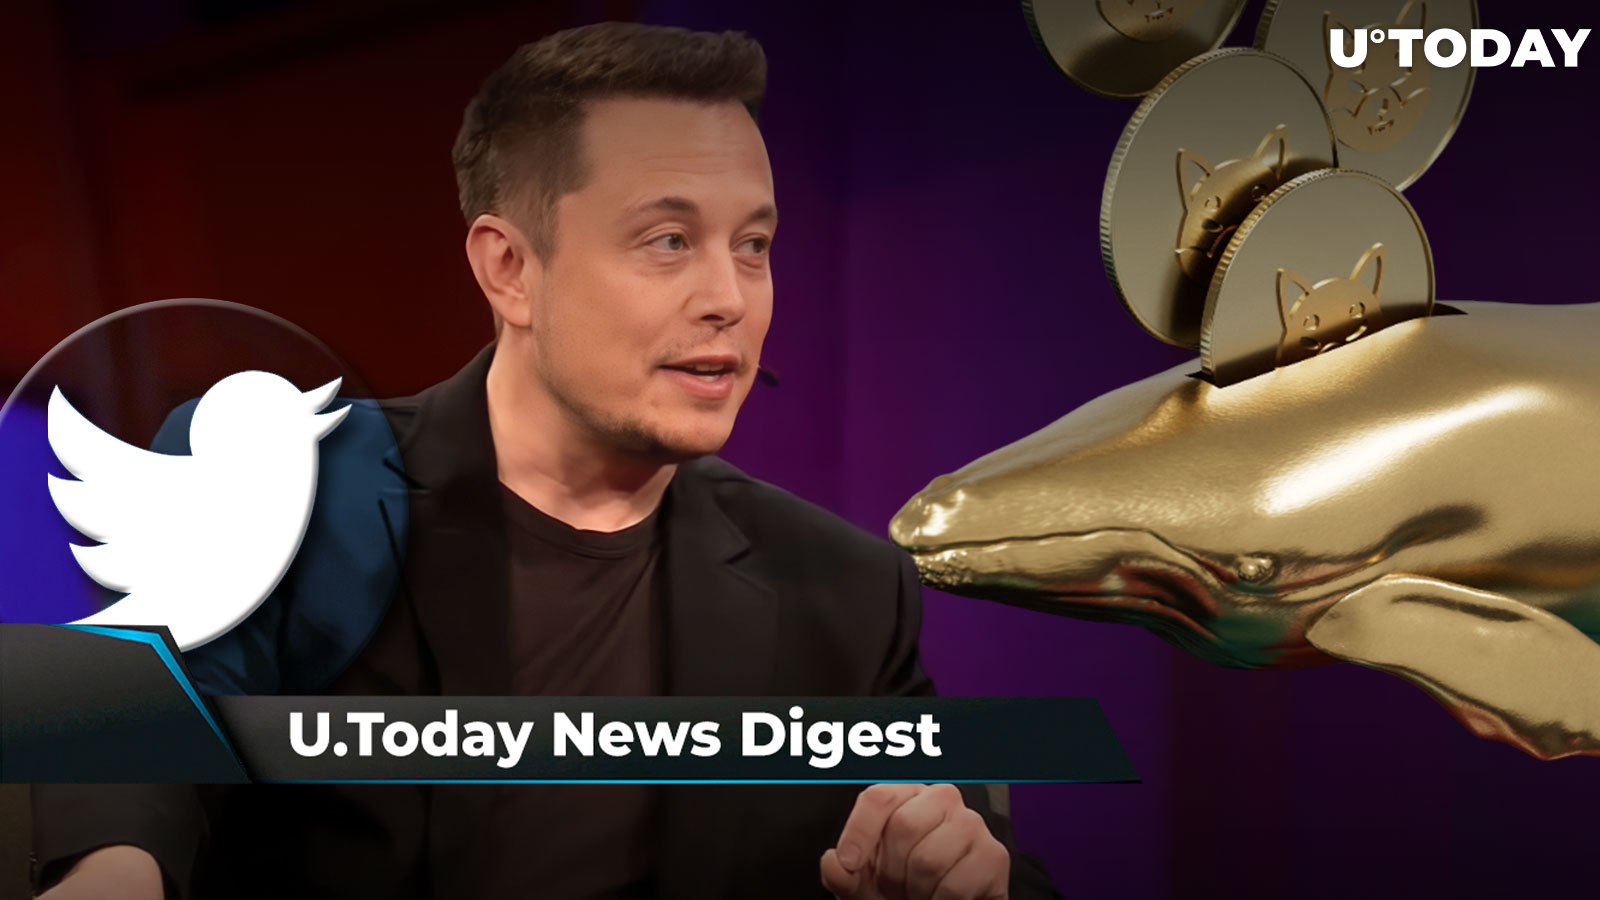 Here’s Why Musk Rejected FTX CEO’s Twitter Offer, SHIB Reacts Steadily to Whale Selling, Warren Buffett’s Old Crypto Warning Rings True: Crypto News Digest by U.Today